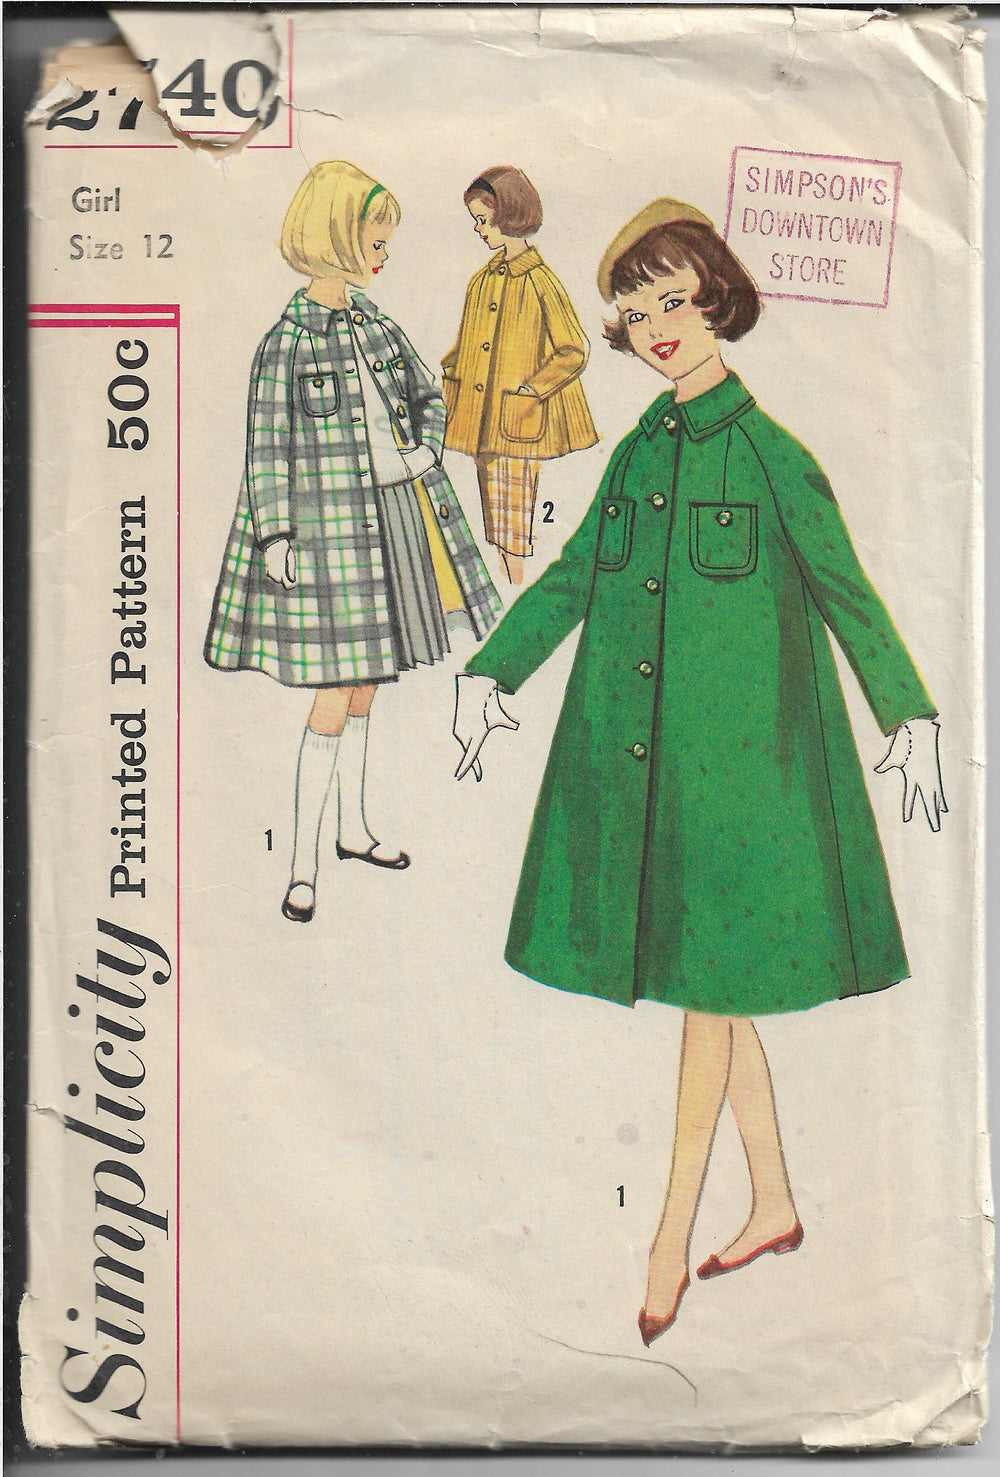 Simplicity 2740 Vintage Sewing Pattern 1950s Girls Coat - VintageStitching - Vintage Sewing Patterns